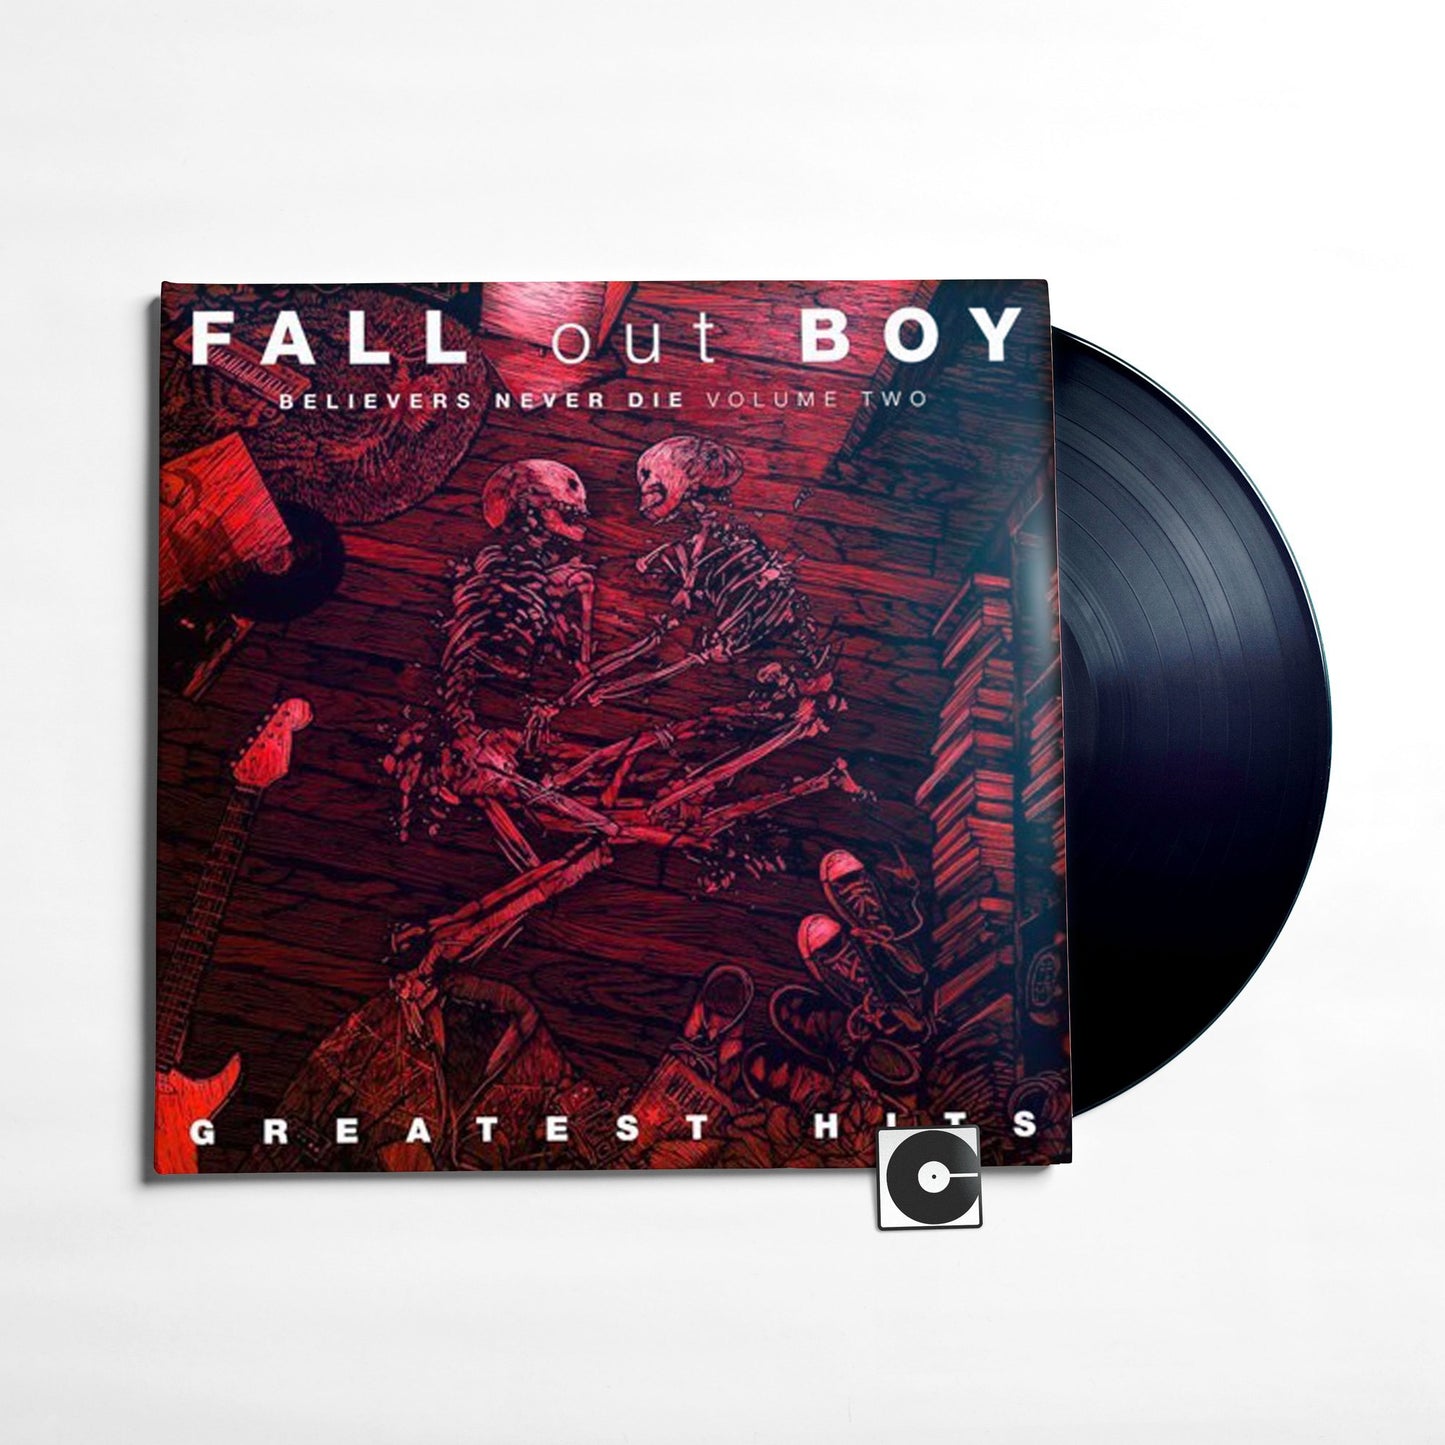 Fall Out Boy Believers Never Die Vol 2 Greatest Hits Comeback Vinyl